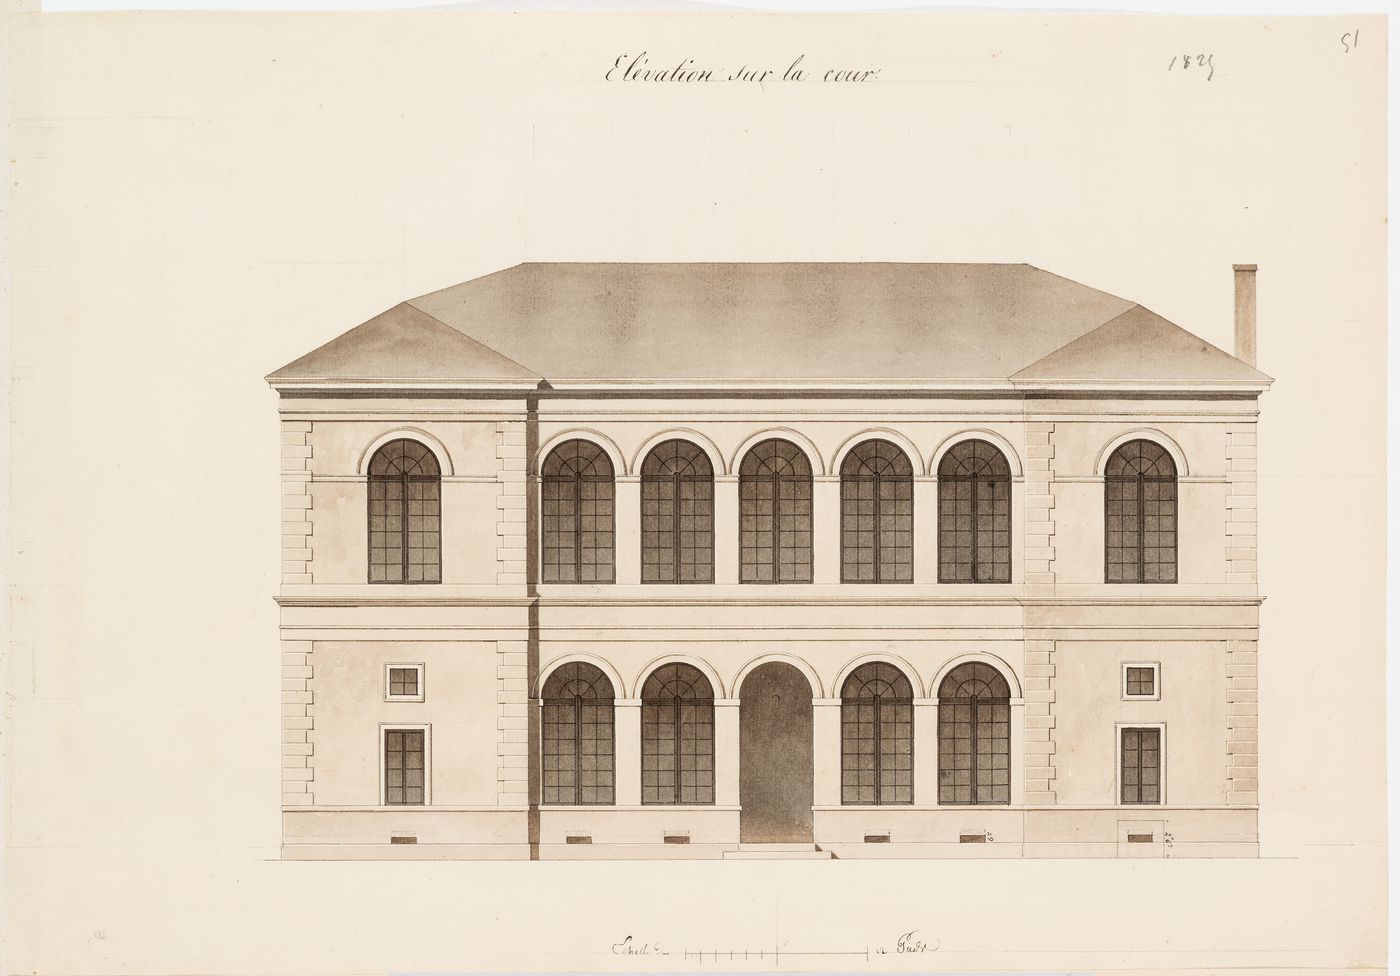 Courtyard elevation for a "guinguette"